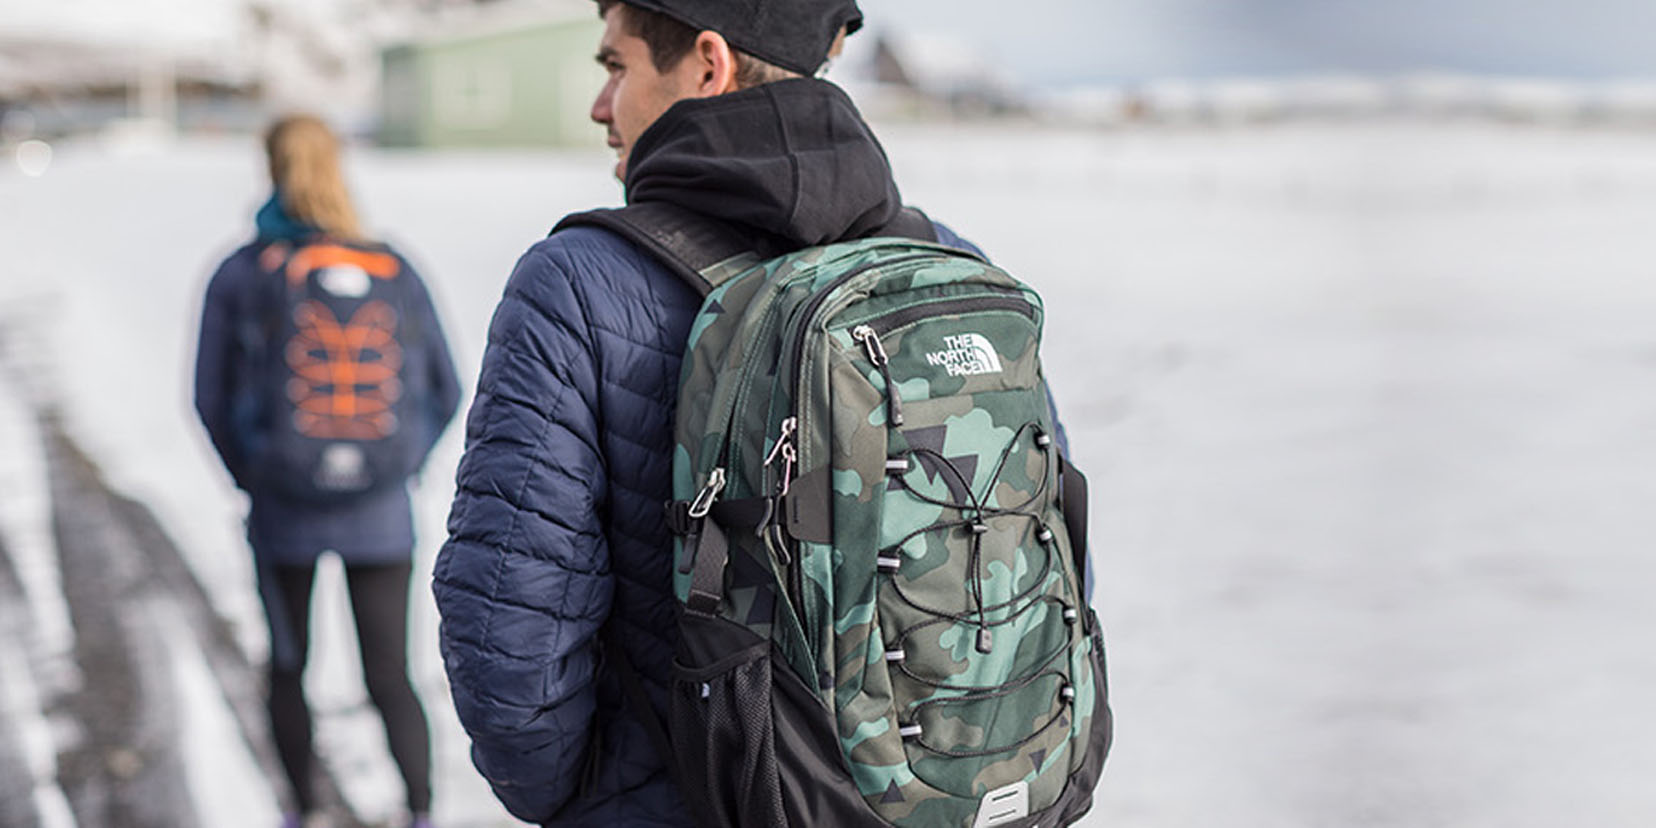 The North Face Backpack Guide has hundreds of options for sc - 9to5Toys